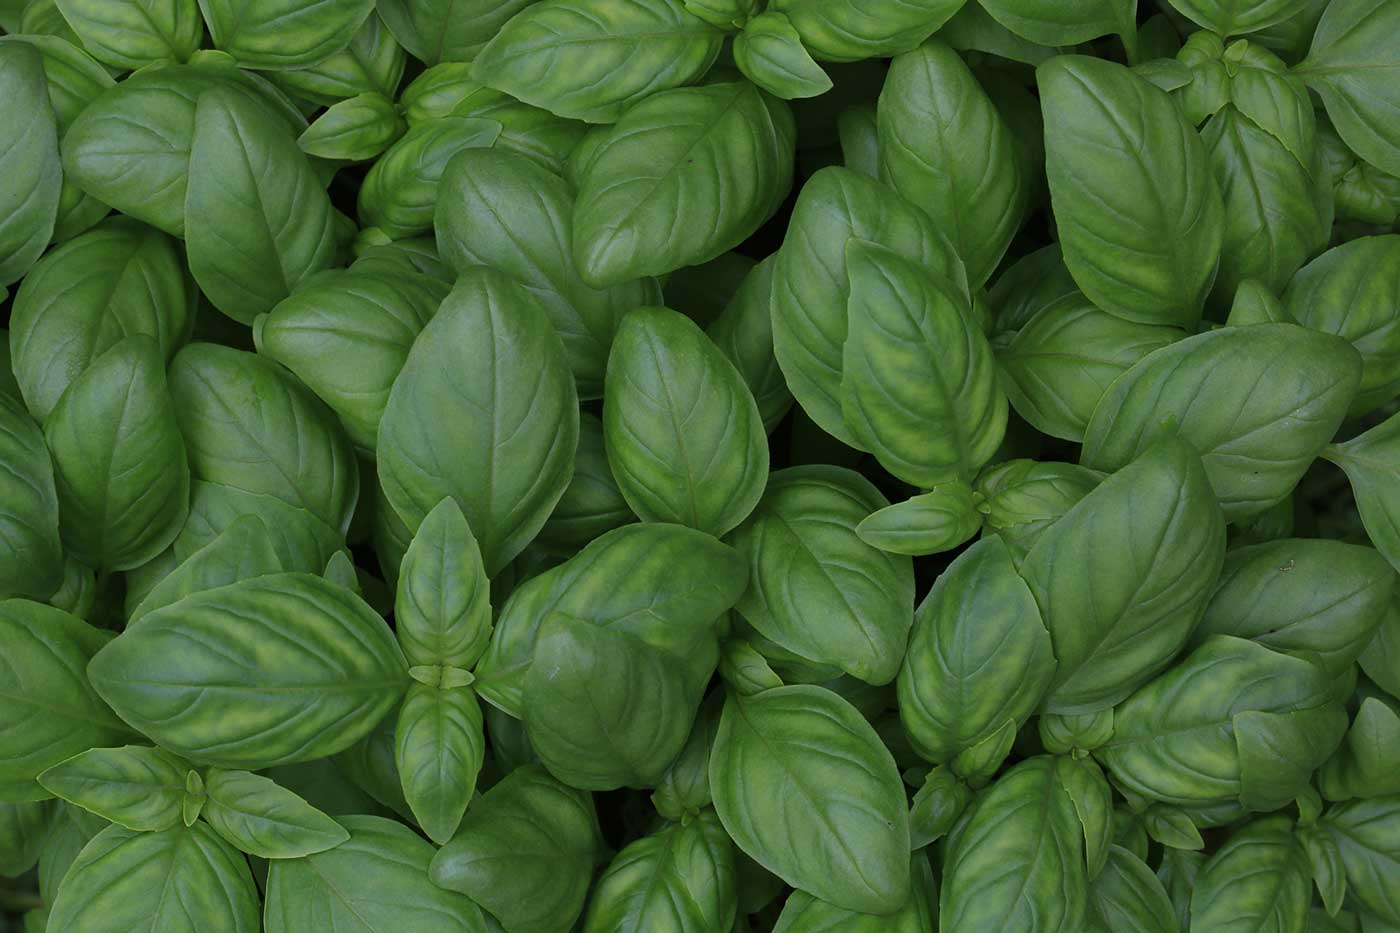 Featured image for “You Won’t “Be Leaf” All of the Benefits Found in Basil”